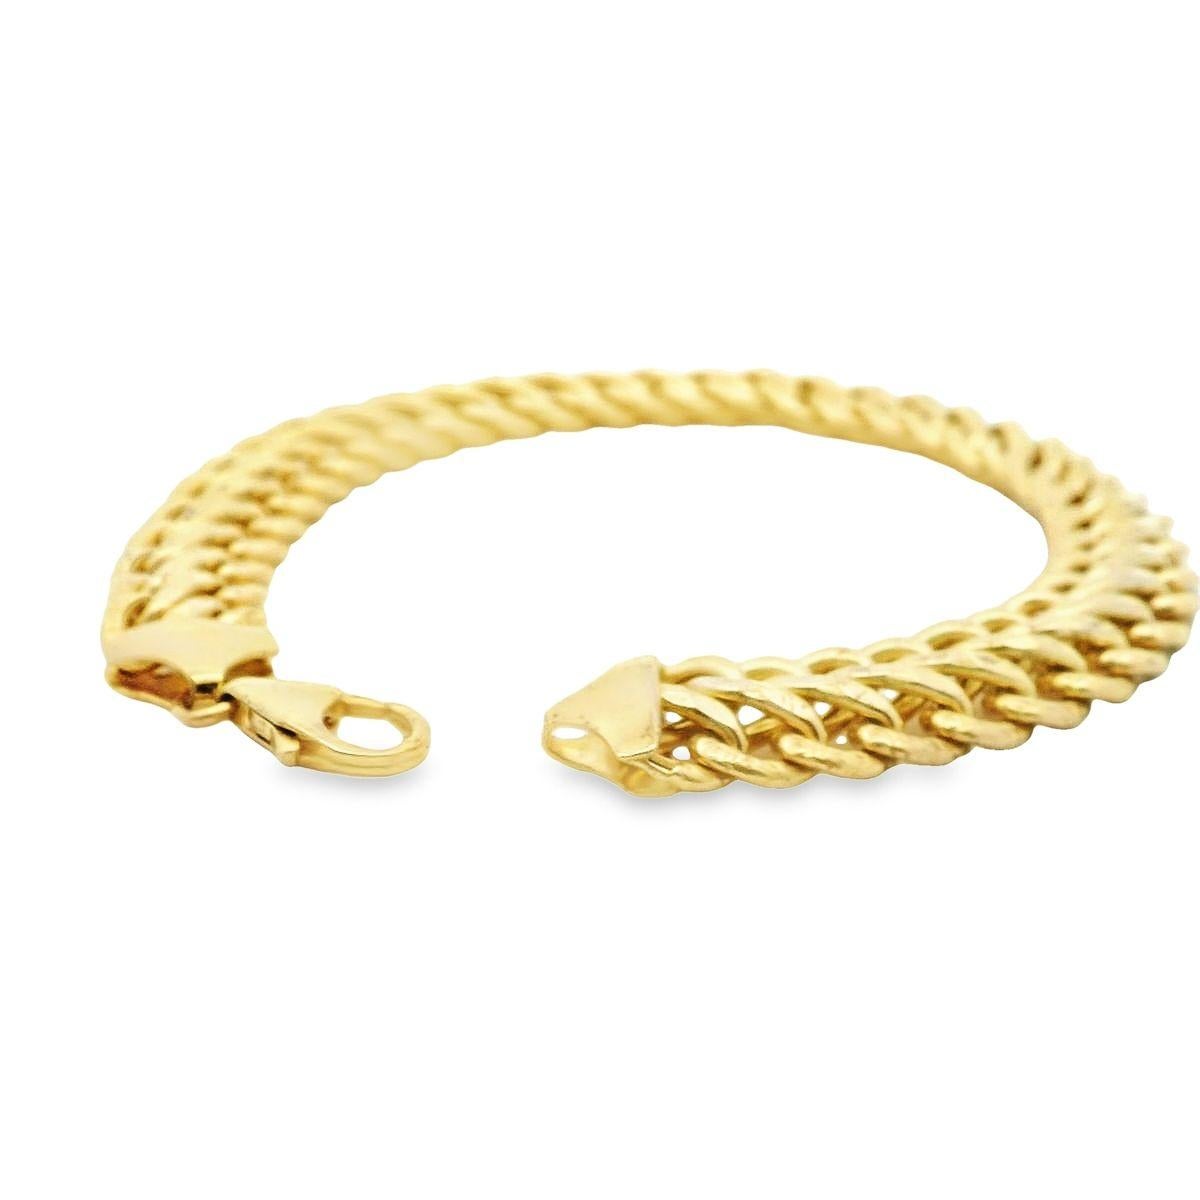 Wrap your wrist in our versatile Italian made 14 karat yellow gold bracelet offered by Alex & Co. This 3 row piece features a diamond cut link extending down the center of this 7.25 inch curb link bracelet. The open links can accommodate charms or